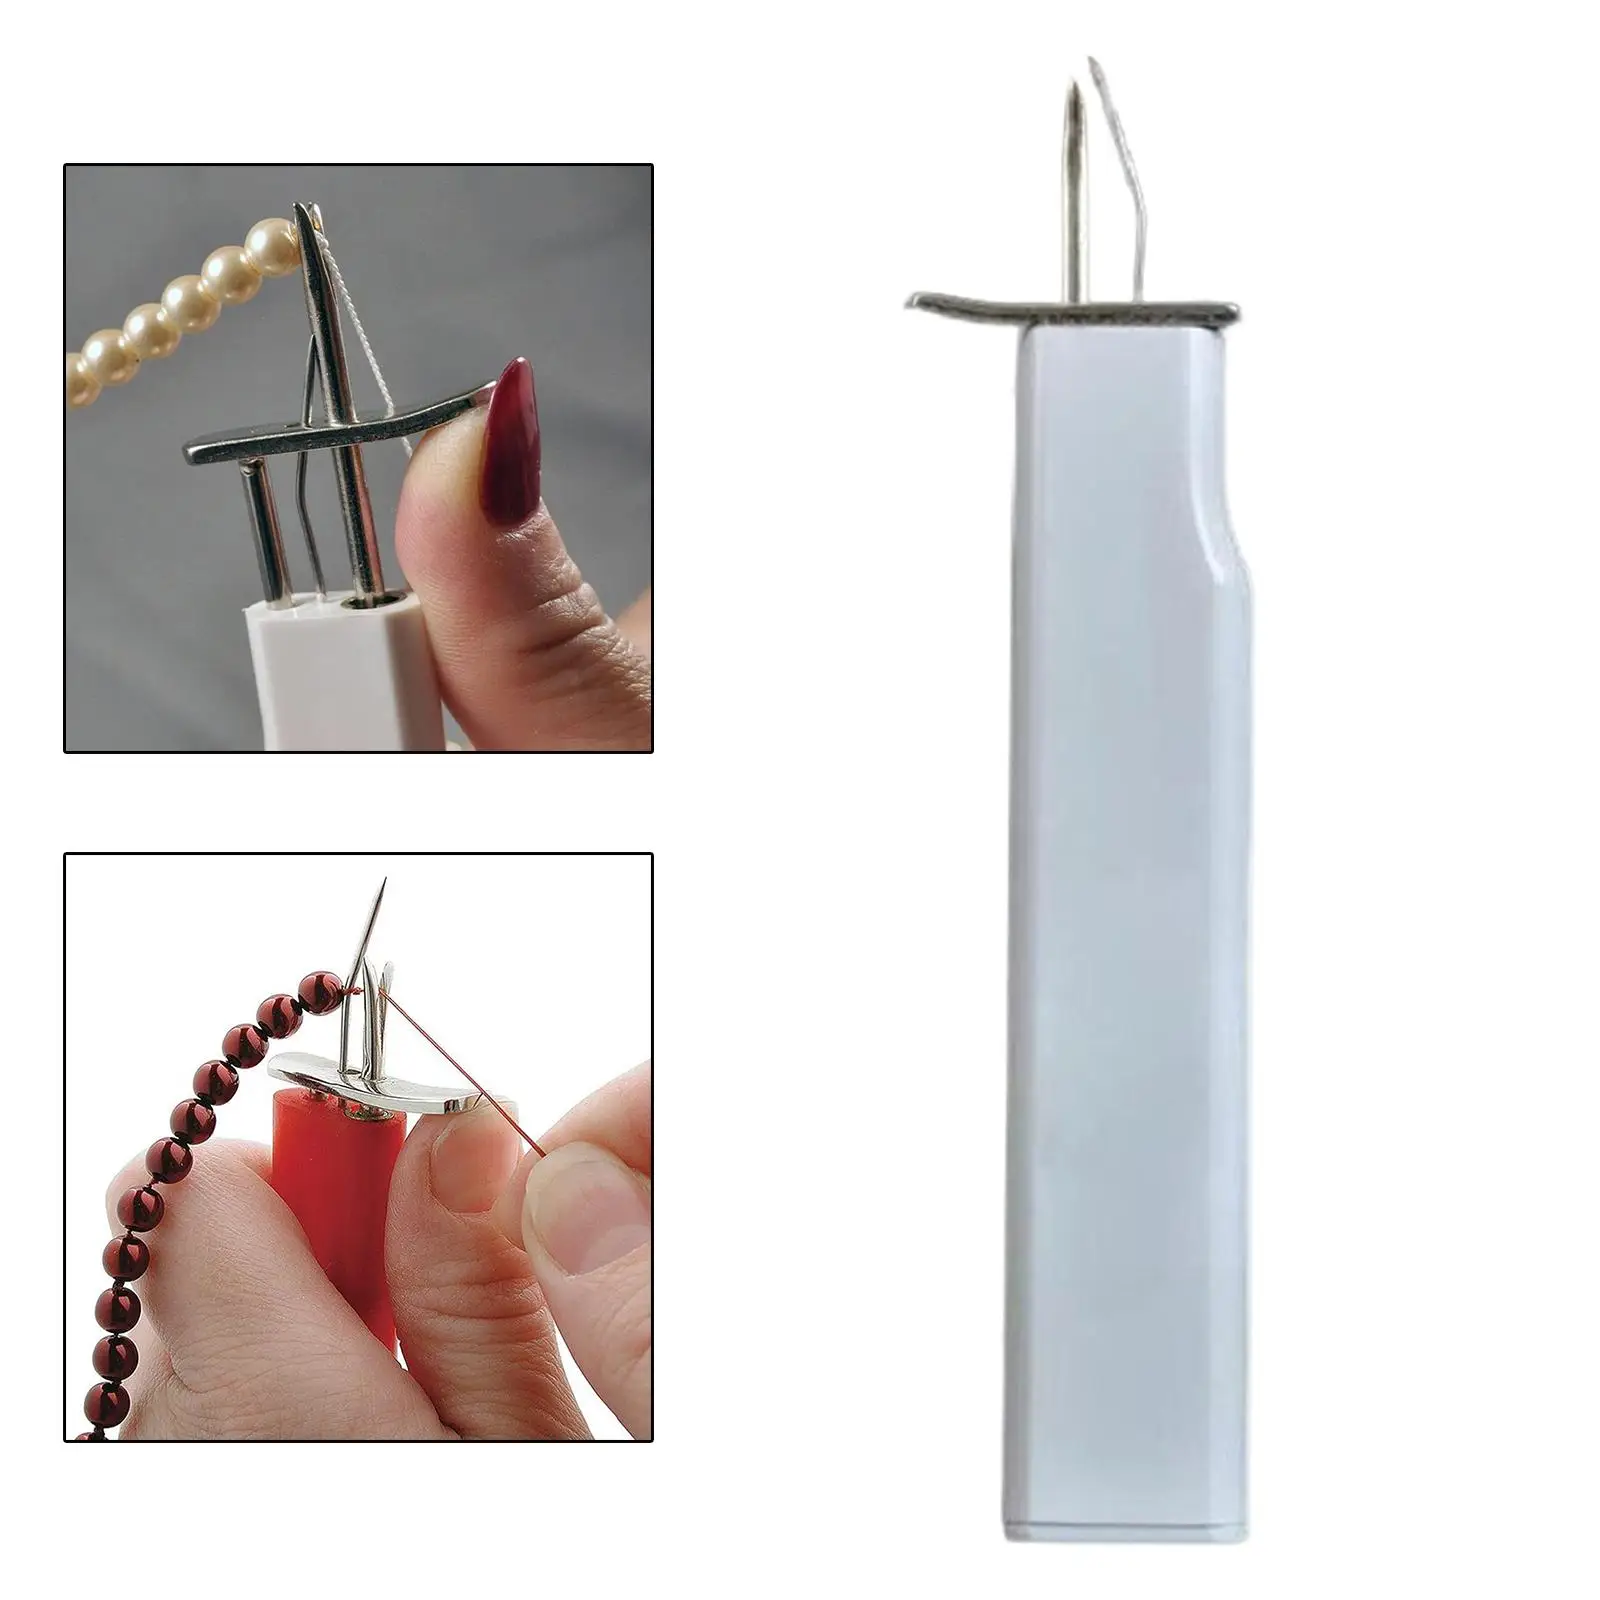 Bead Knotting Tool Create Safety Knots Jewelry Making Tool Handheld DIY Bead Knotter for Stringing Pearls and Other Beads